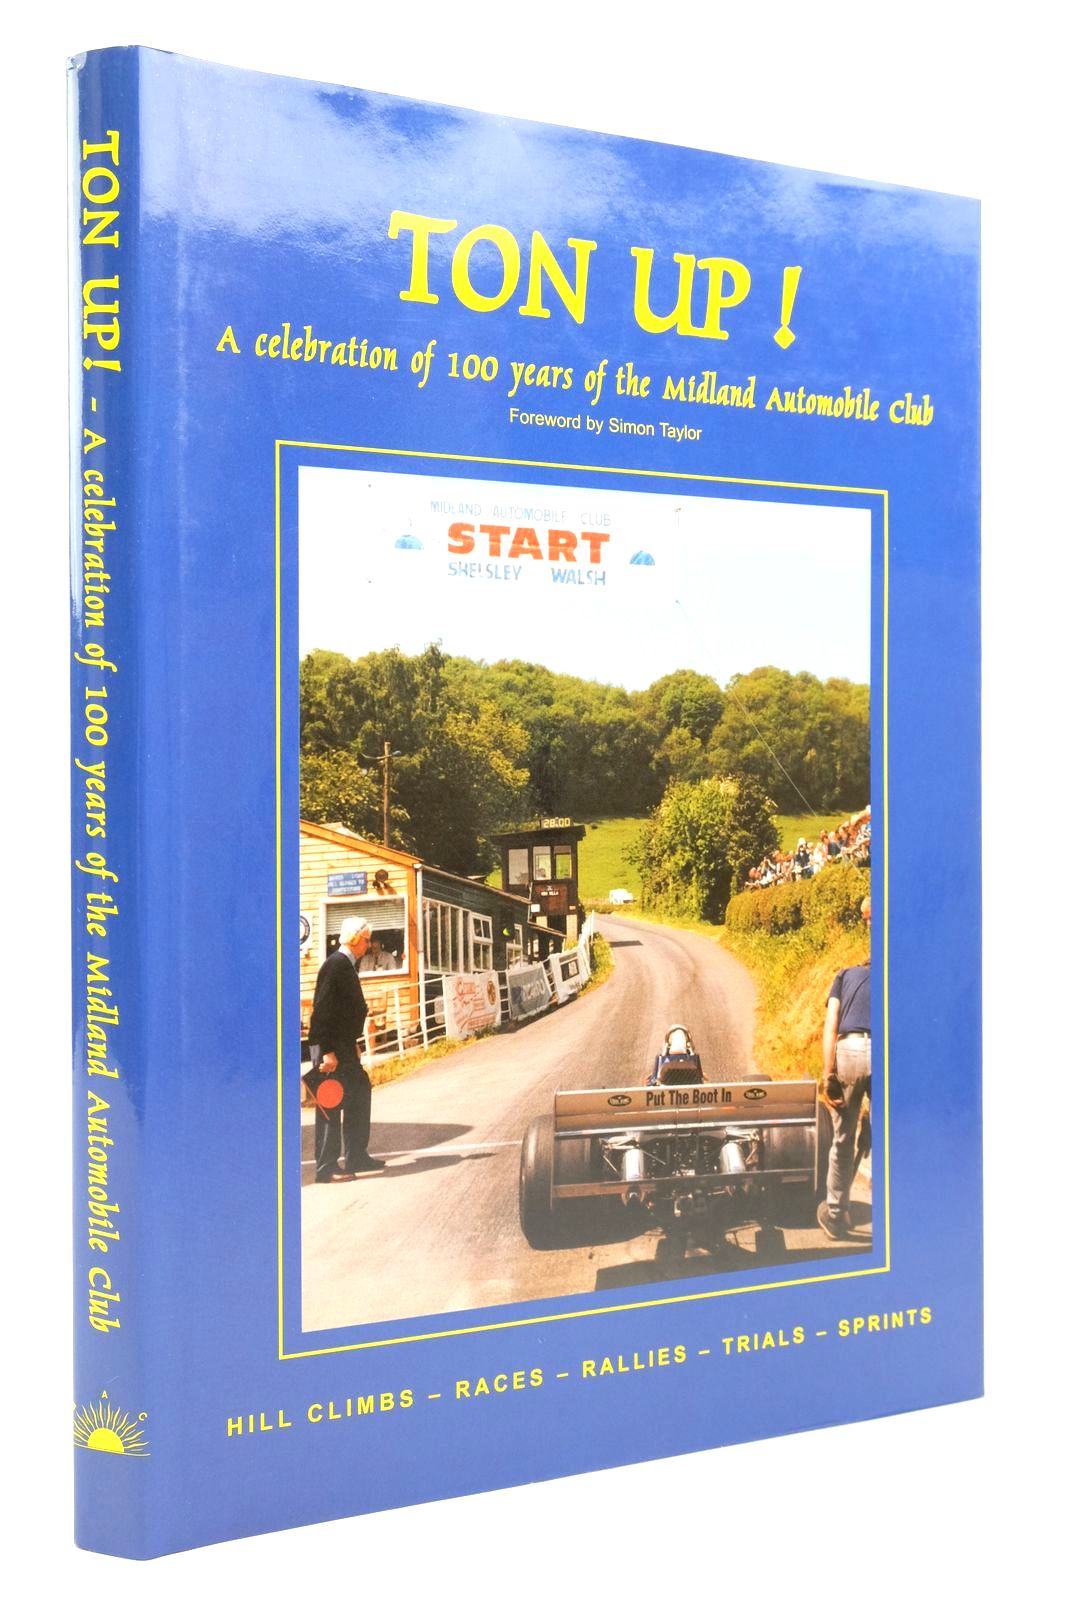 Photo of TON UP! A CELEBRATION OF A HUNDRED YEARS OF THE MIDLAND AUTOMOBILE CLUB- Stock Number: 2140279